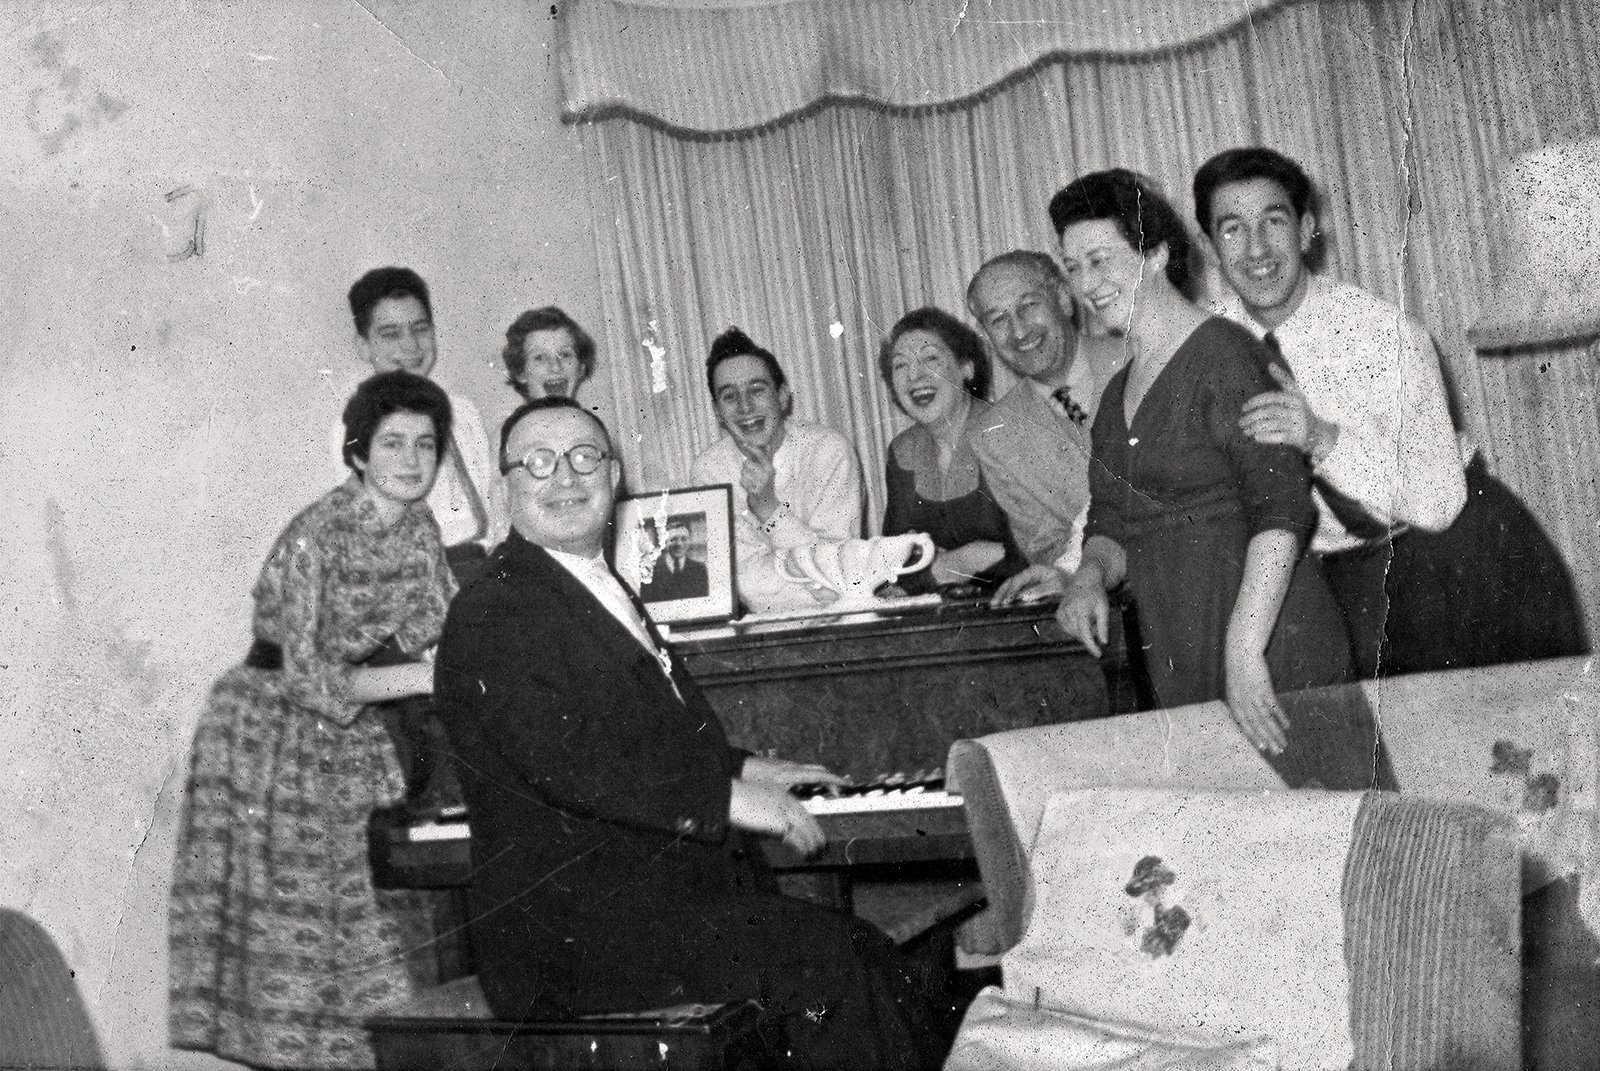 Hyman Shaper entertaining his family and relatives, c. 1956.